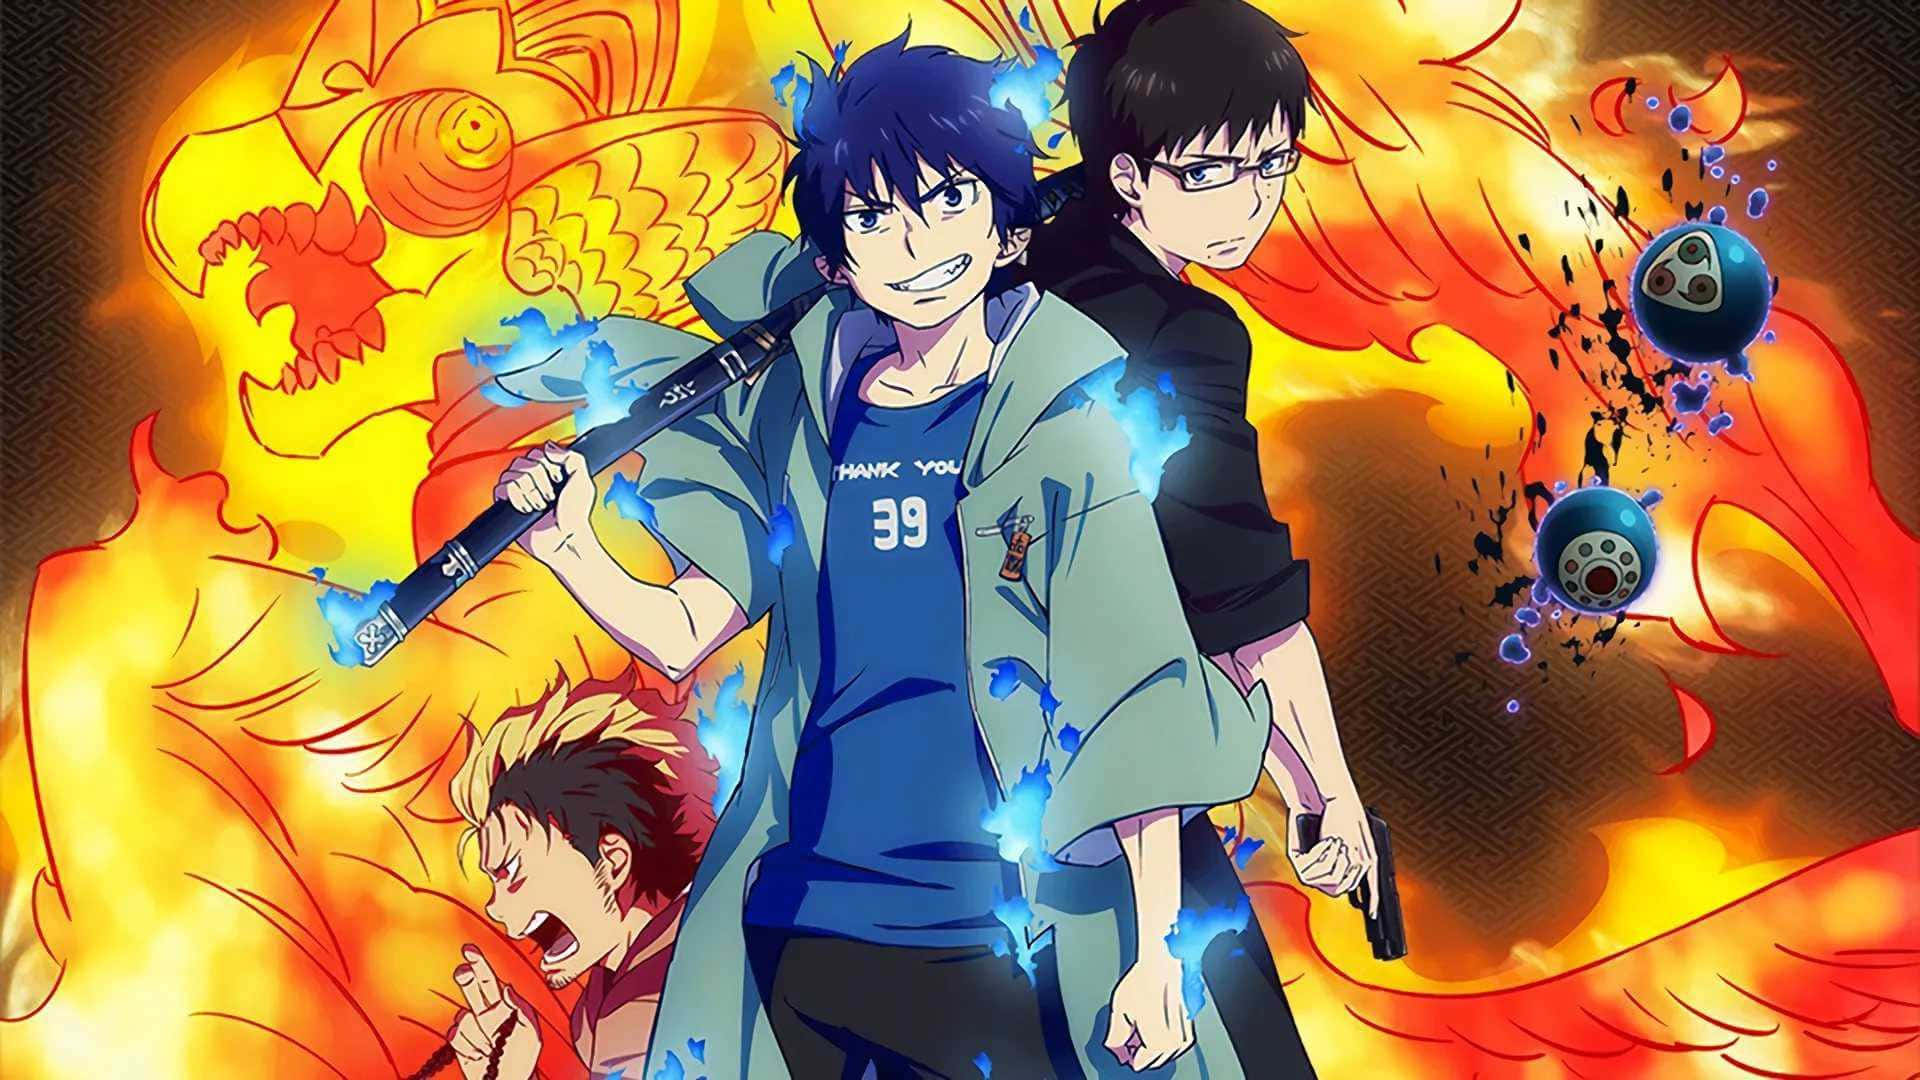 Okumura Brothers From Epic Anime Blue Exorcist Wallpaper